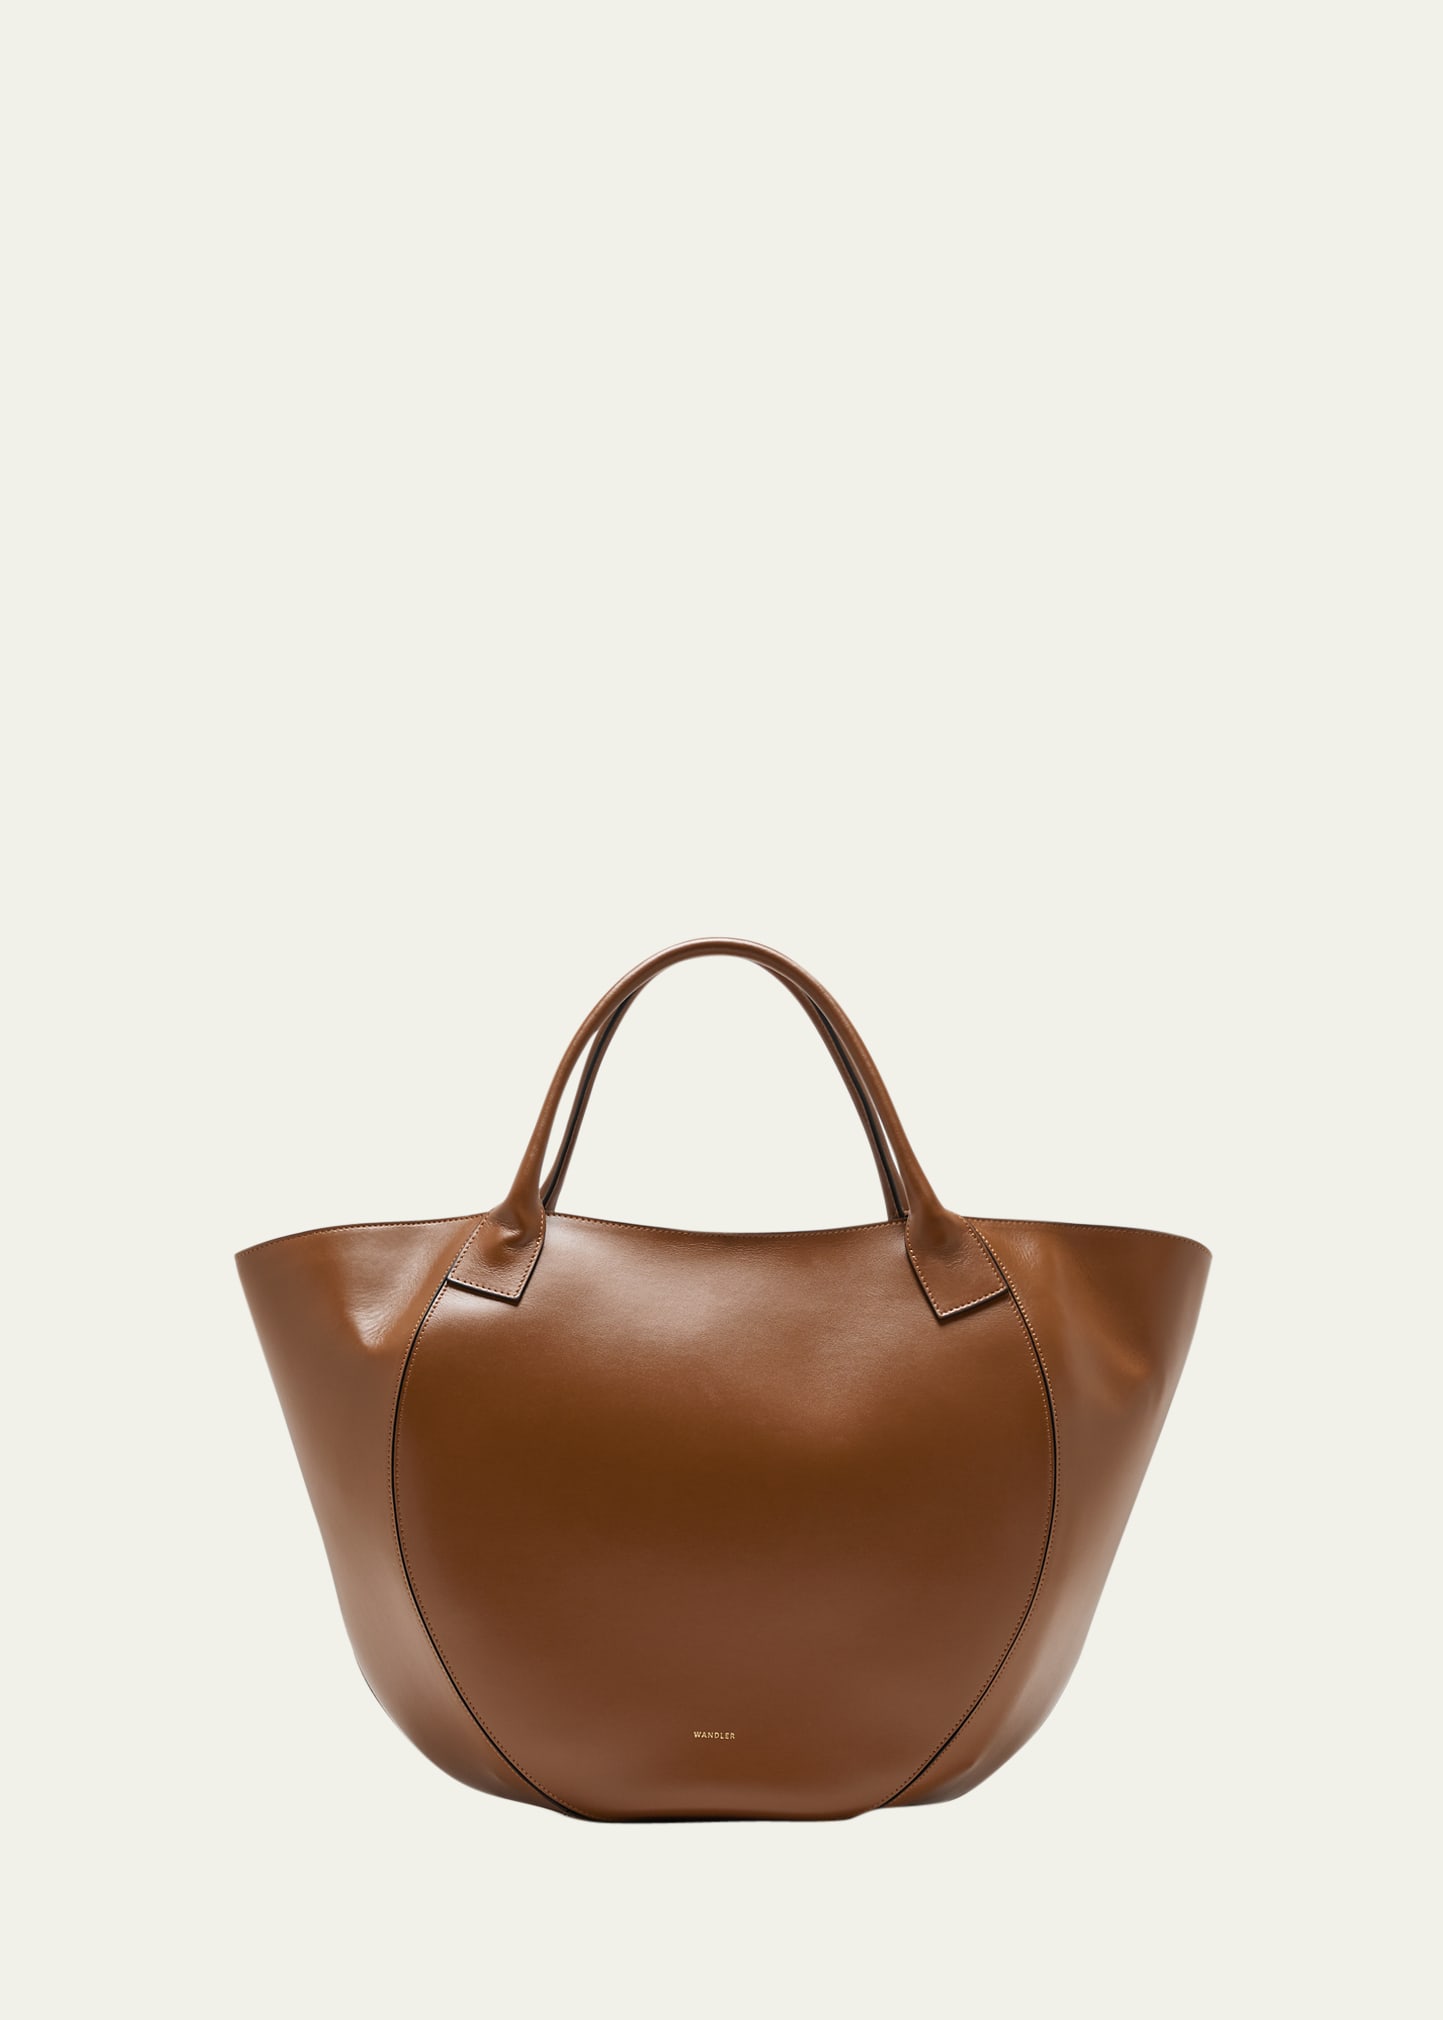 Wandler Mia Soft Leather Tote Bag In Moth Eclipse